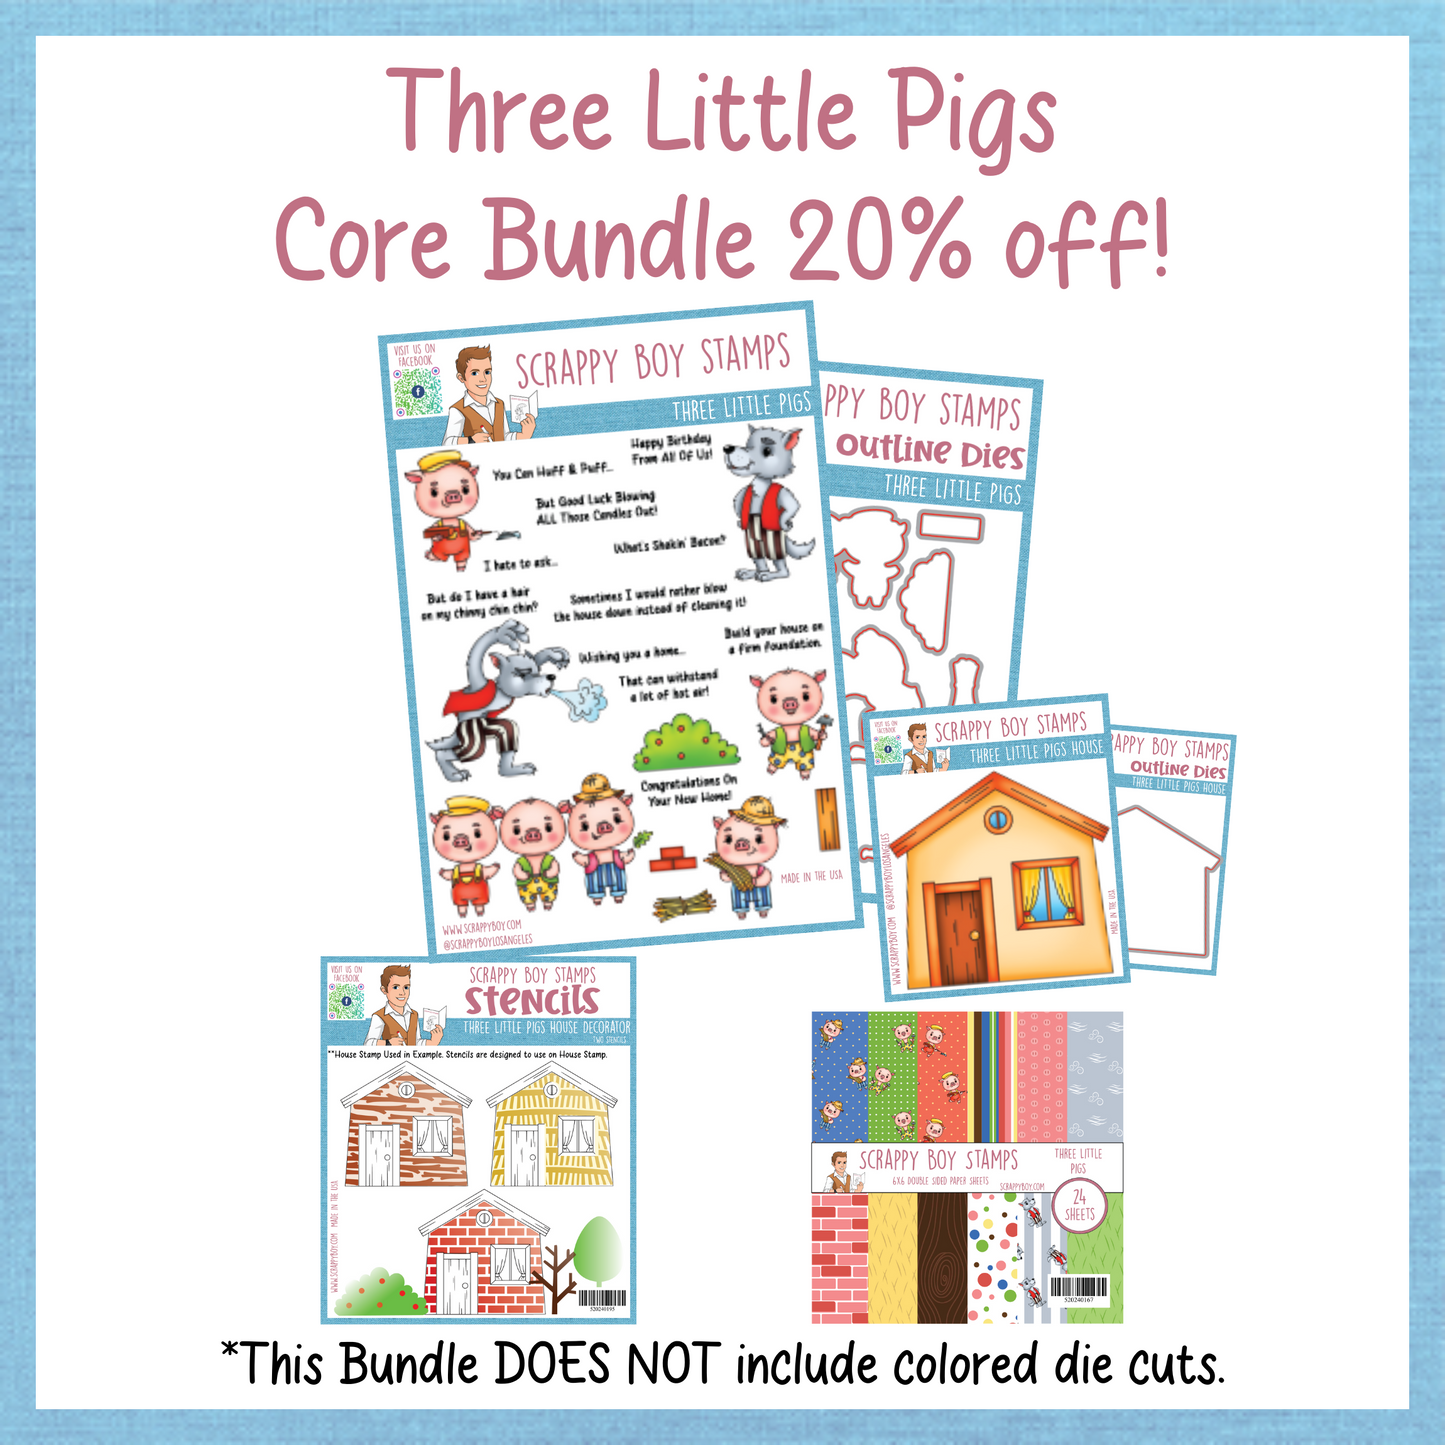 Core Bundle - Three Little Pigs Release Scrappy Boy Stamps